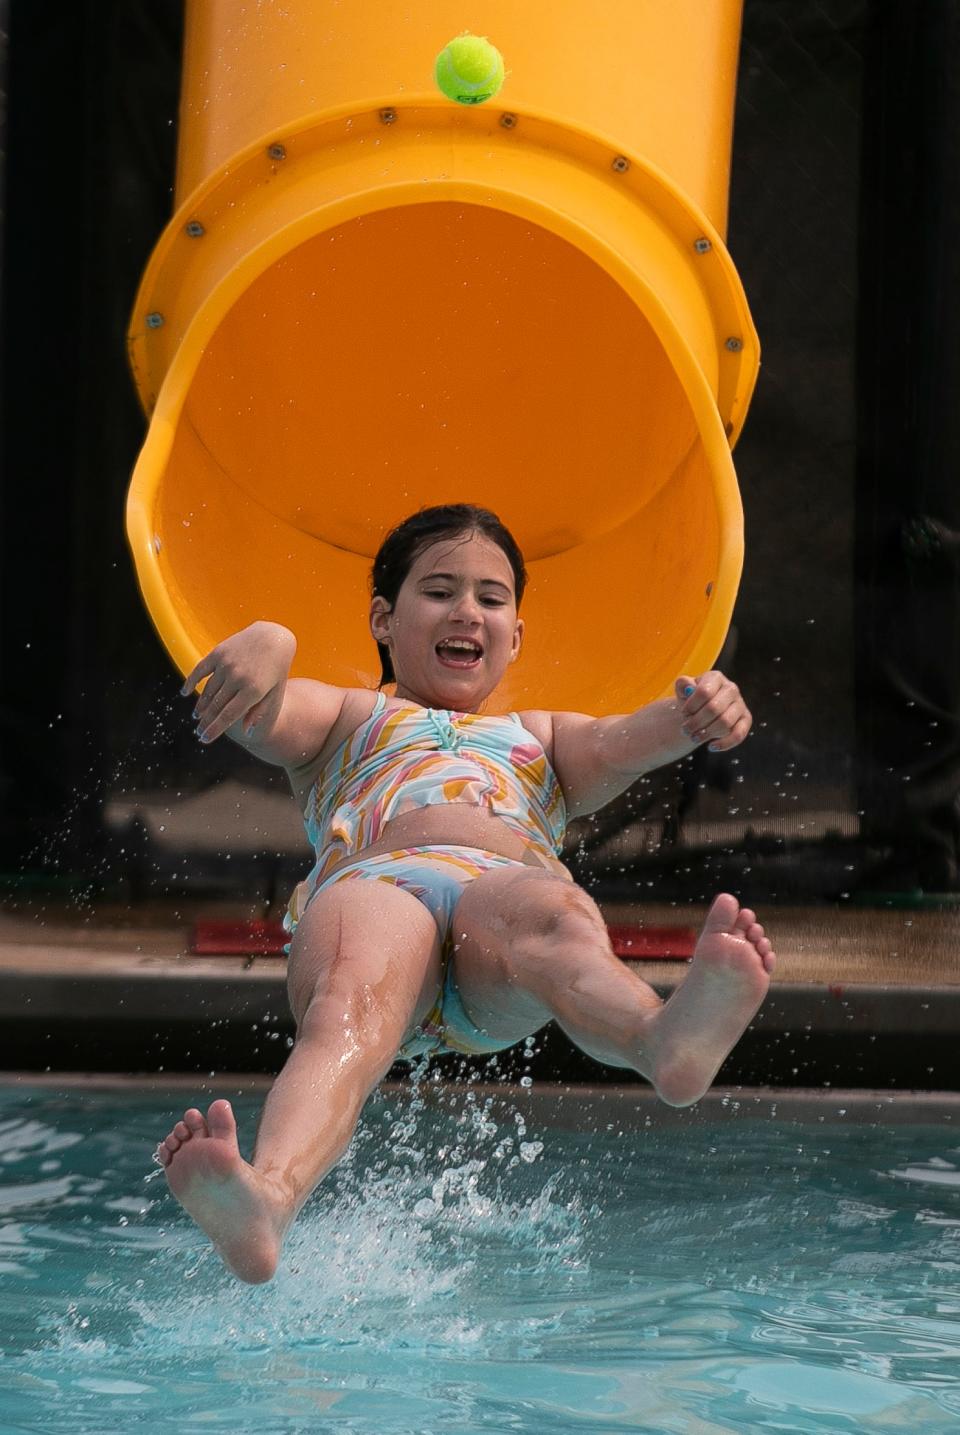 Natalie Furniss, 10 of Carroll, throws a tennis ball while playing a game of pass as she comes out of the water slide the the Bremen pool on June 5, 2023, in Bremen, Ohio.